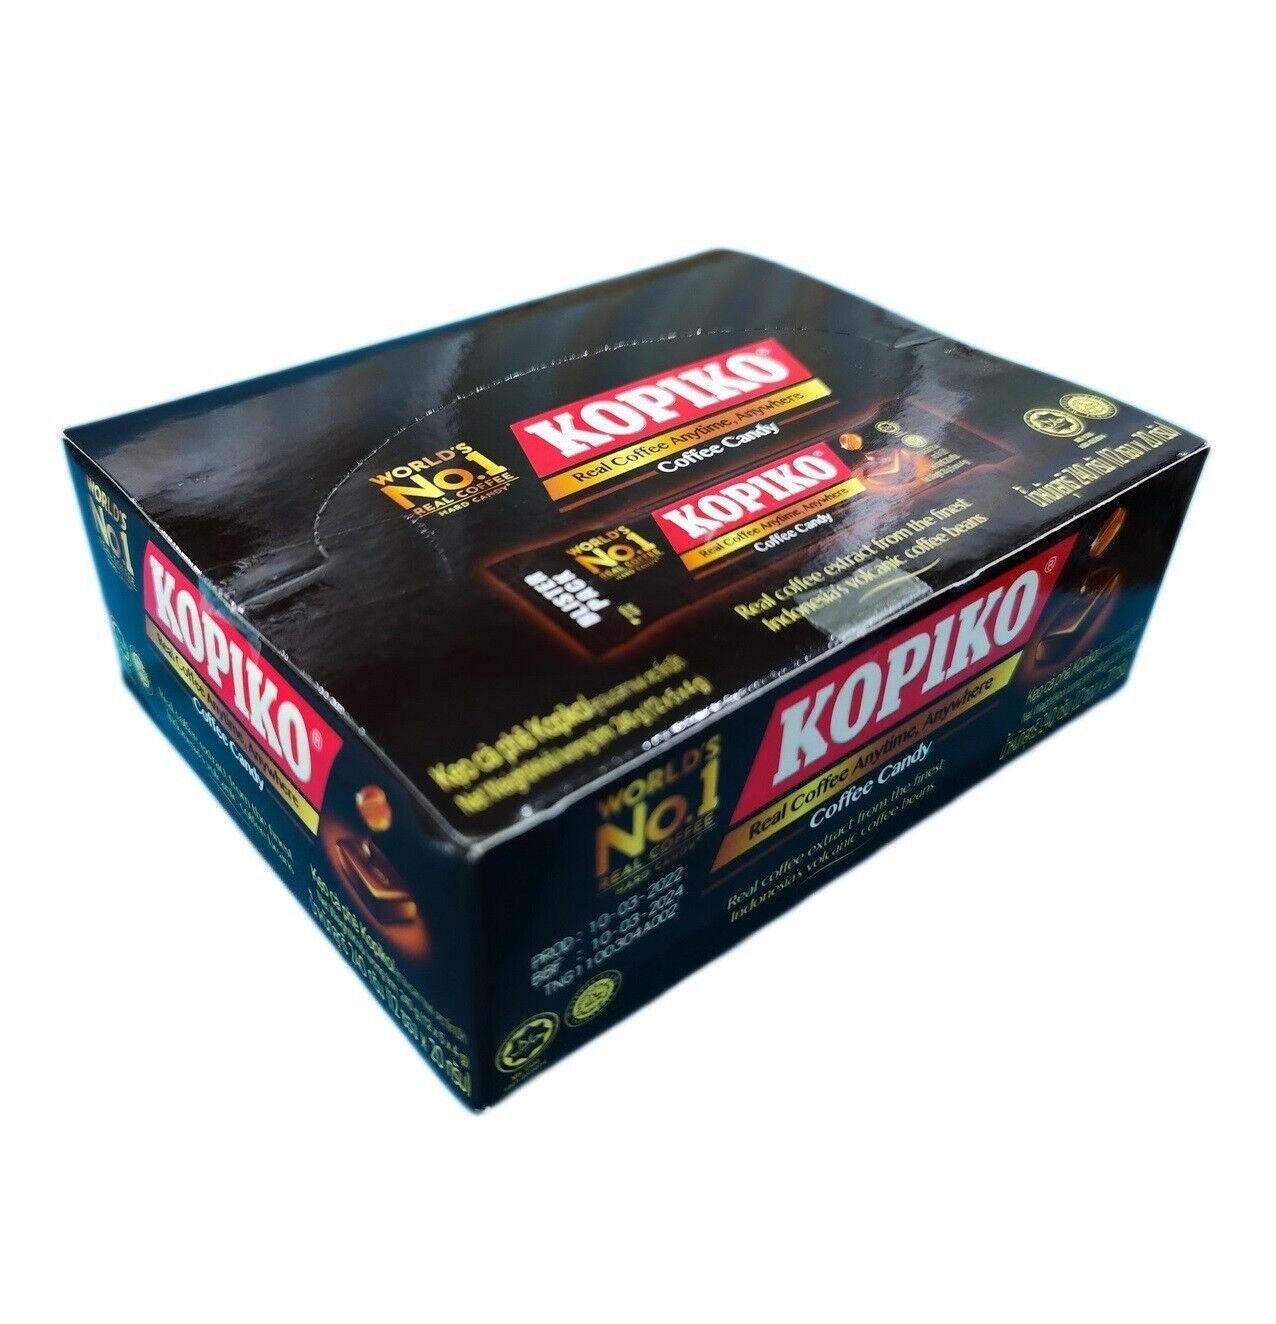 Primary image for 12 Packs Kopiko Coffee Candy Blister Pack Original Hard Candy (1 Box)